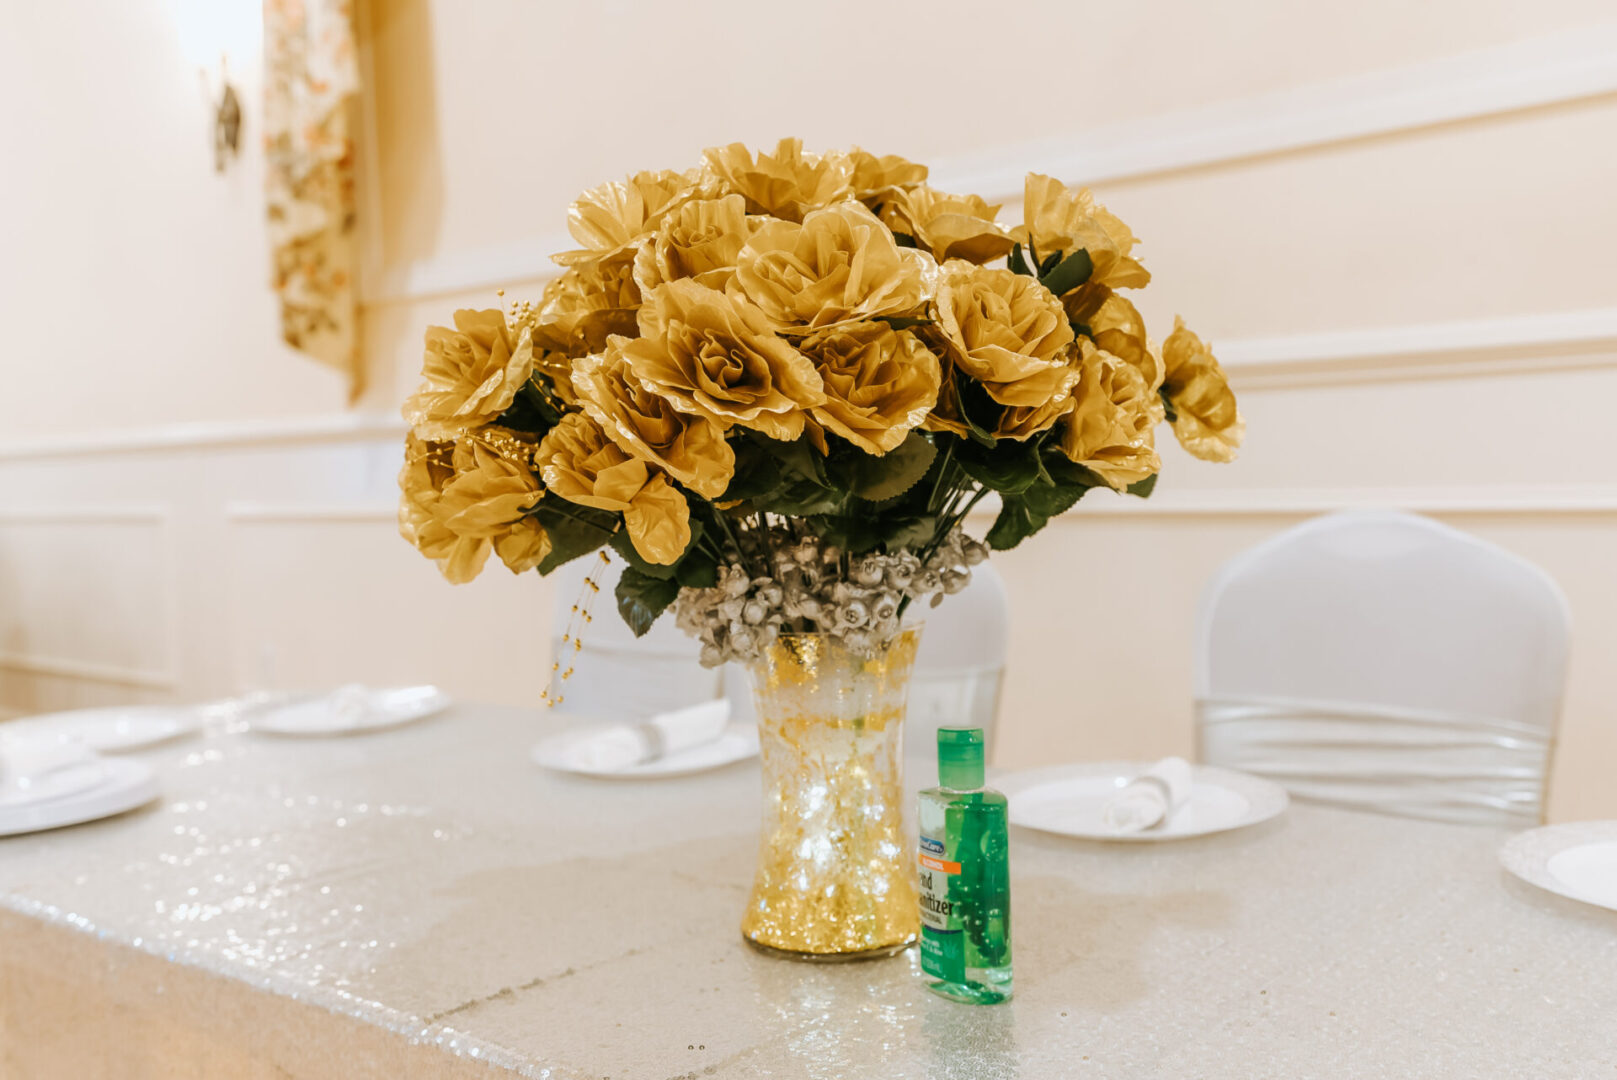 Golden roses in a vase on a table